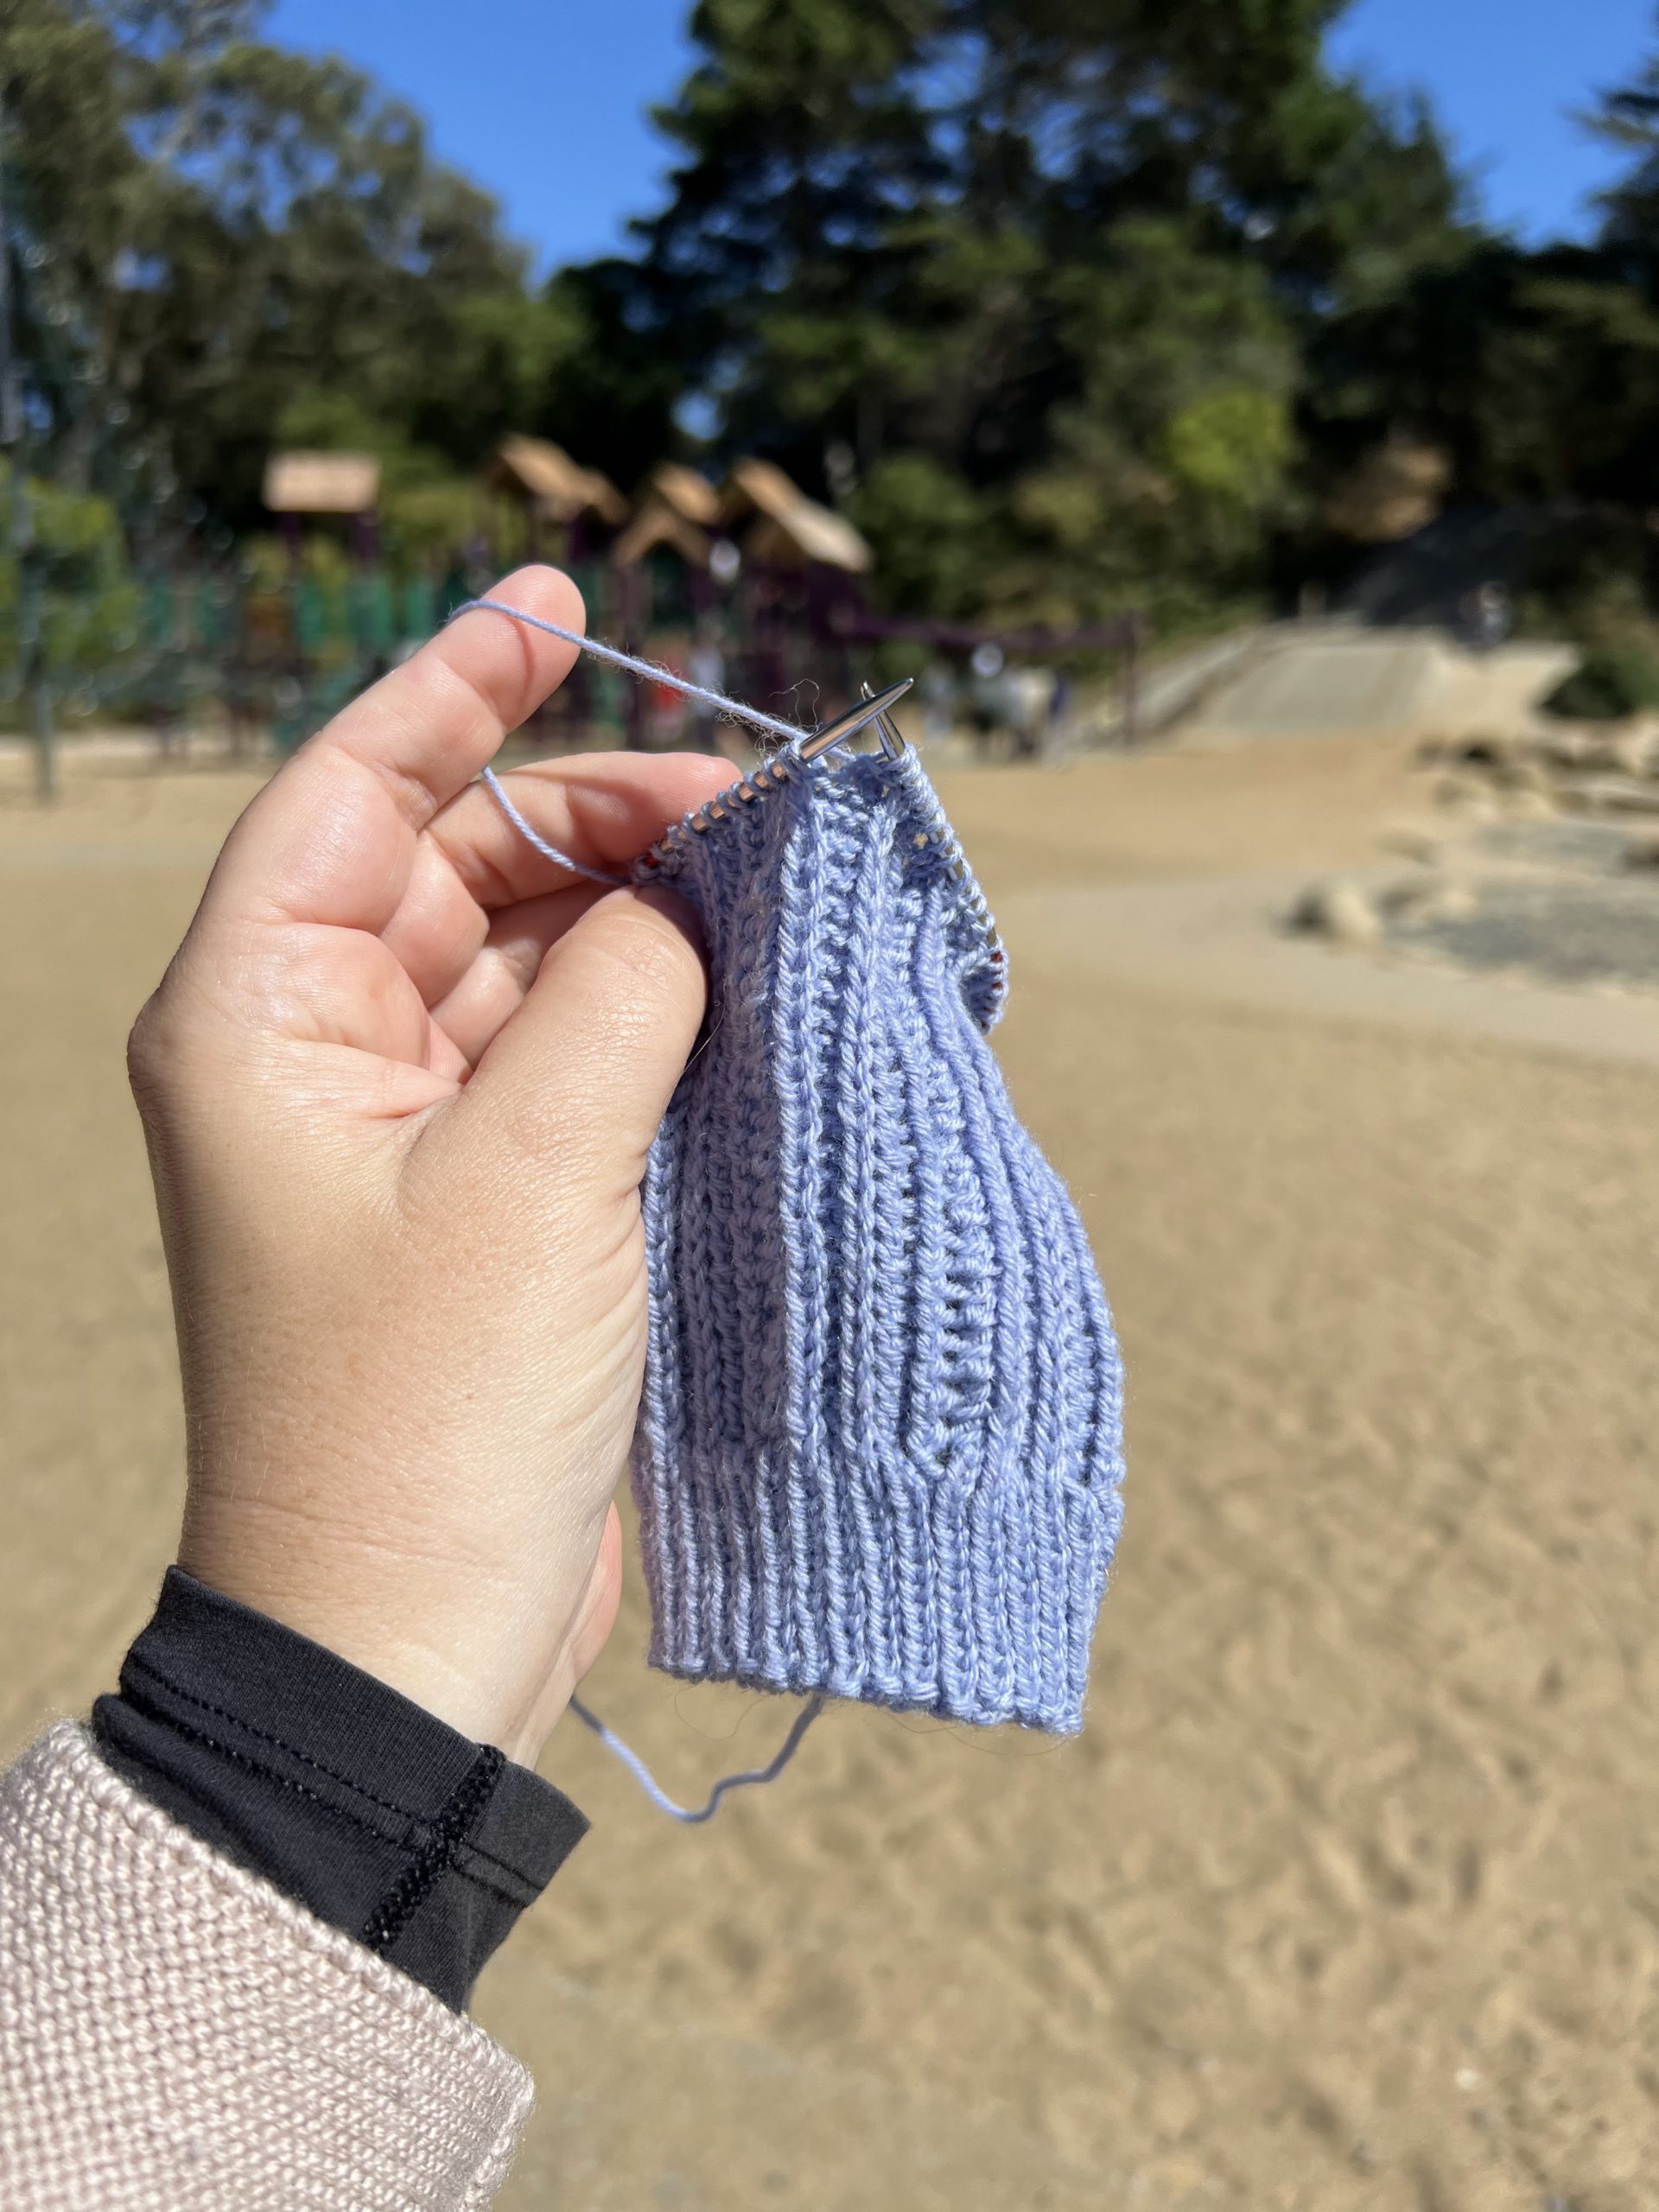 A small, plump hand holds up a half-knit sock leg. Blurred in the background is lots of sand and a playground structure.